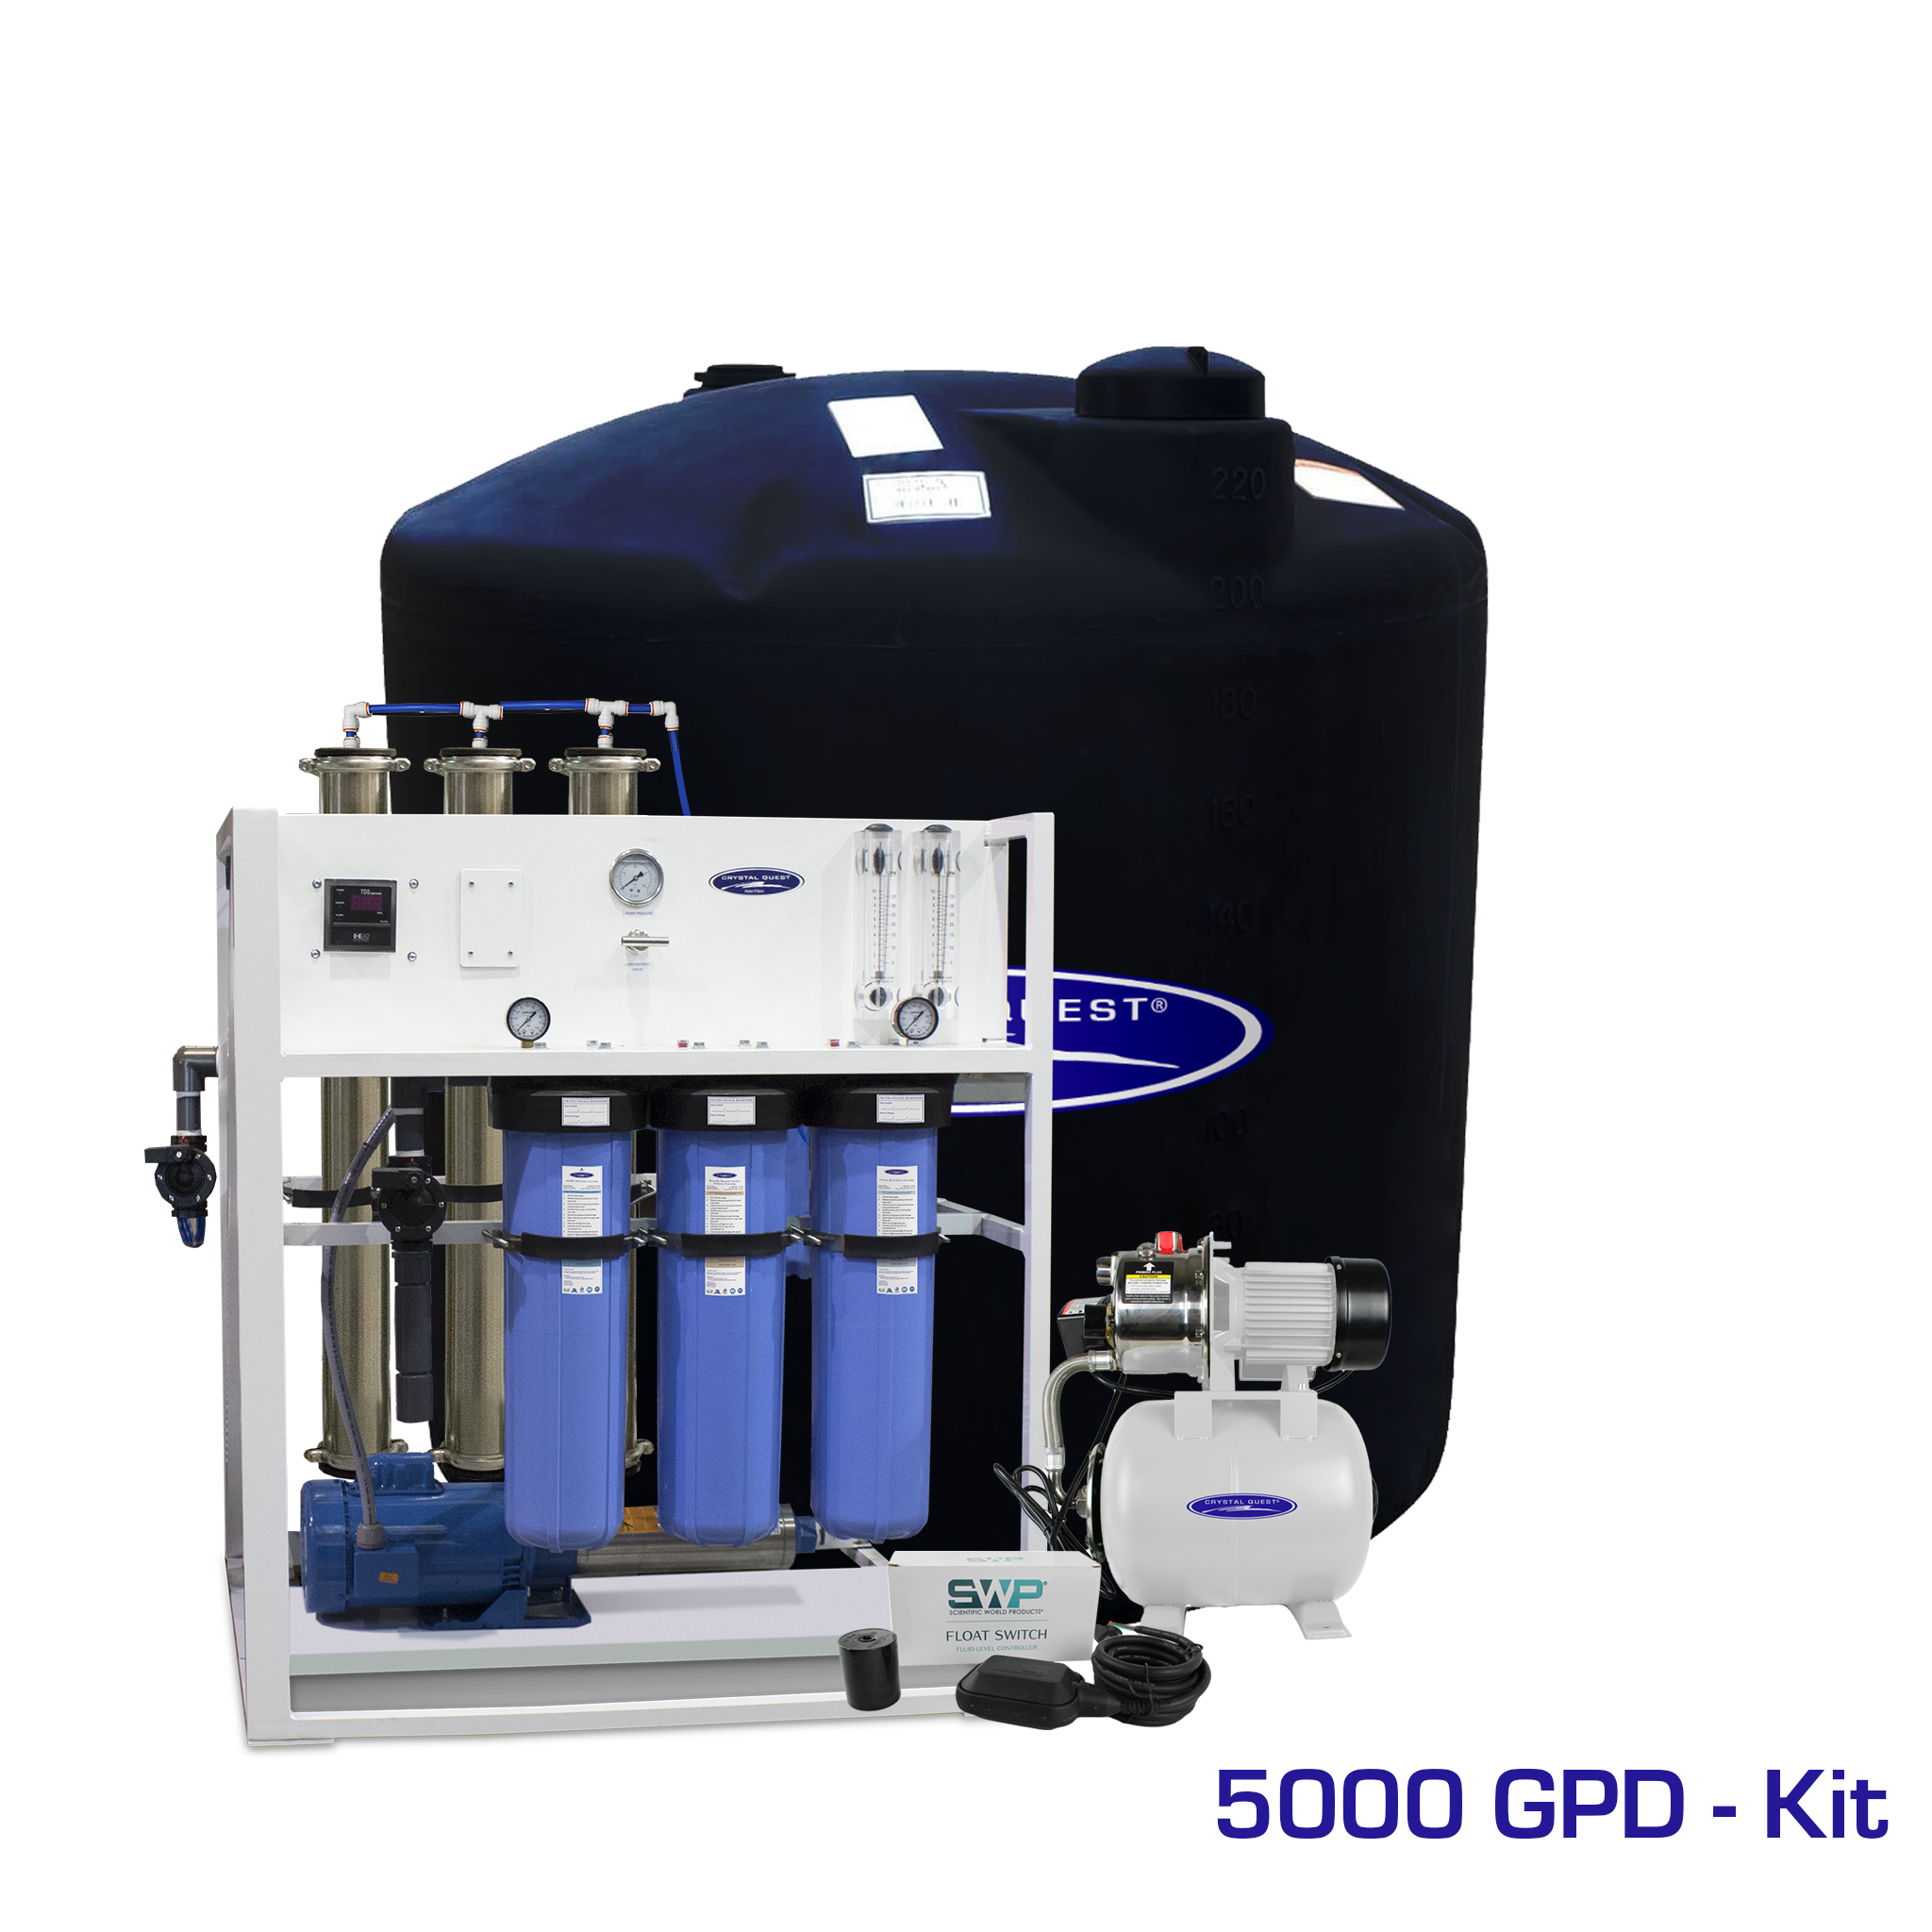 5,000 GPD / Add Storage Tank Kit (220 Gal) Medical Mid-Flow Reverse Osmosis System (500-7000 GPD) - Commercial - Crystal Quest